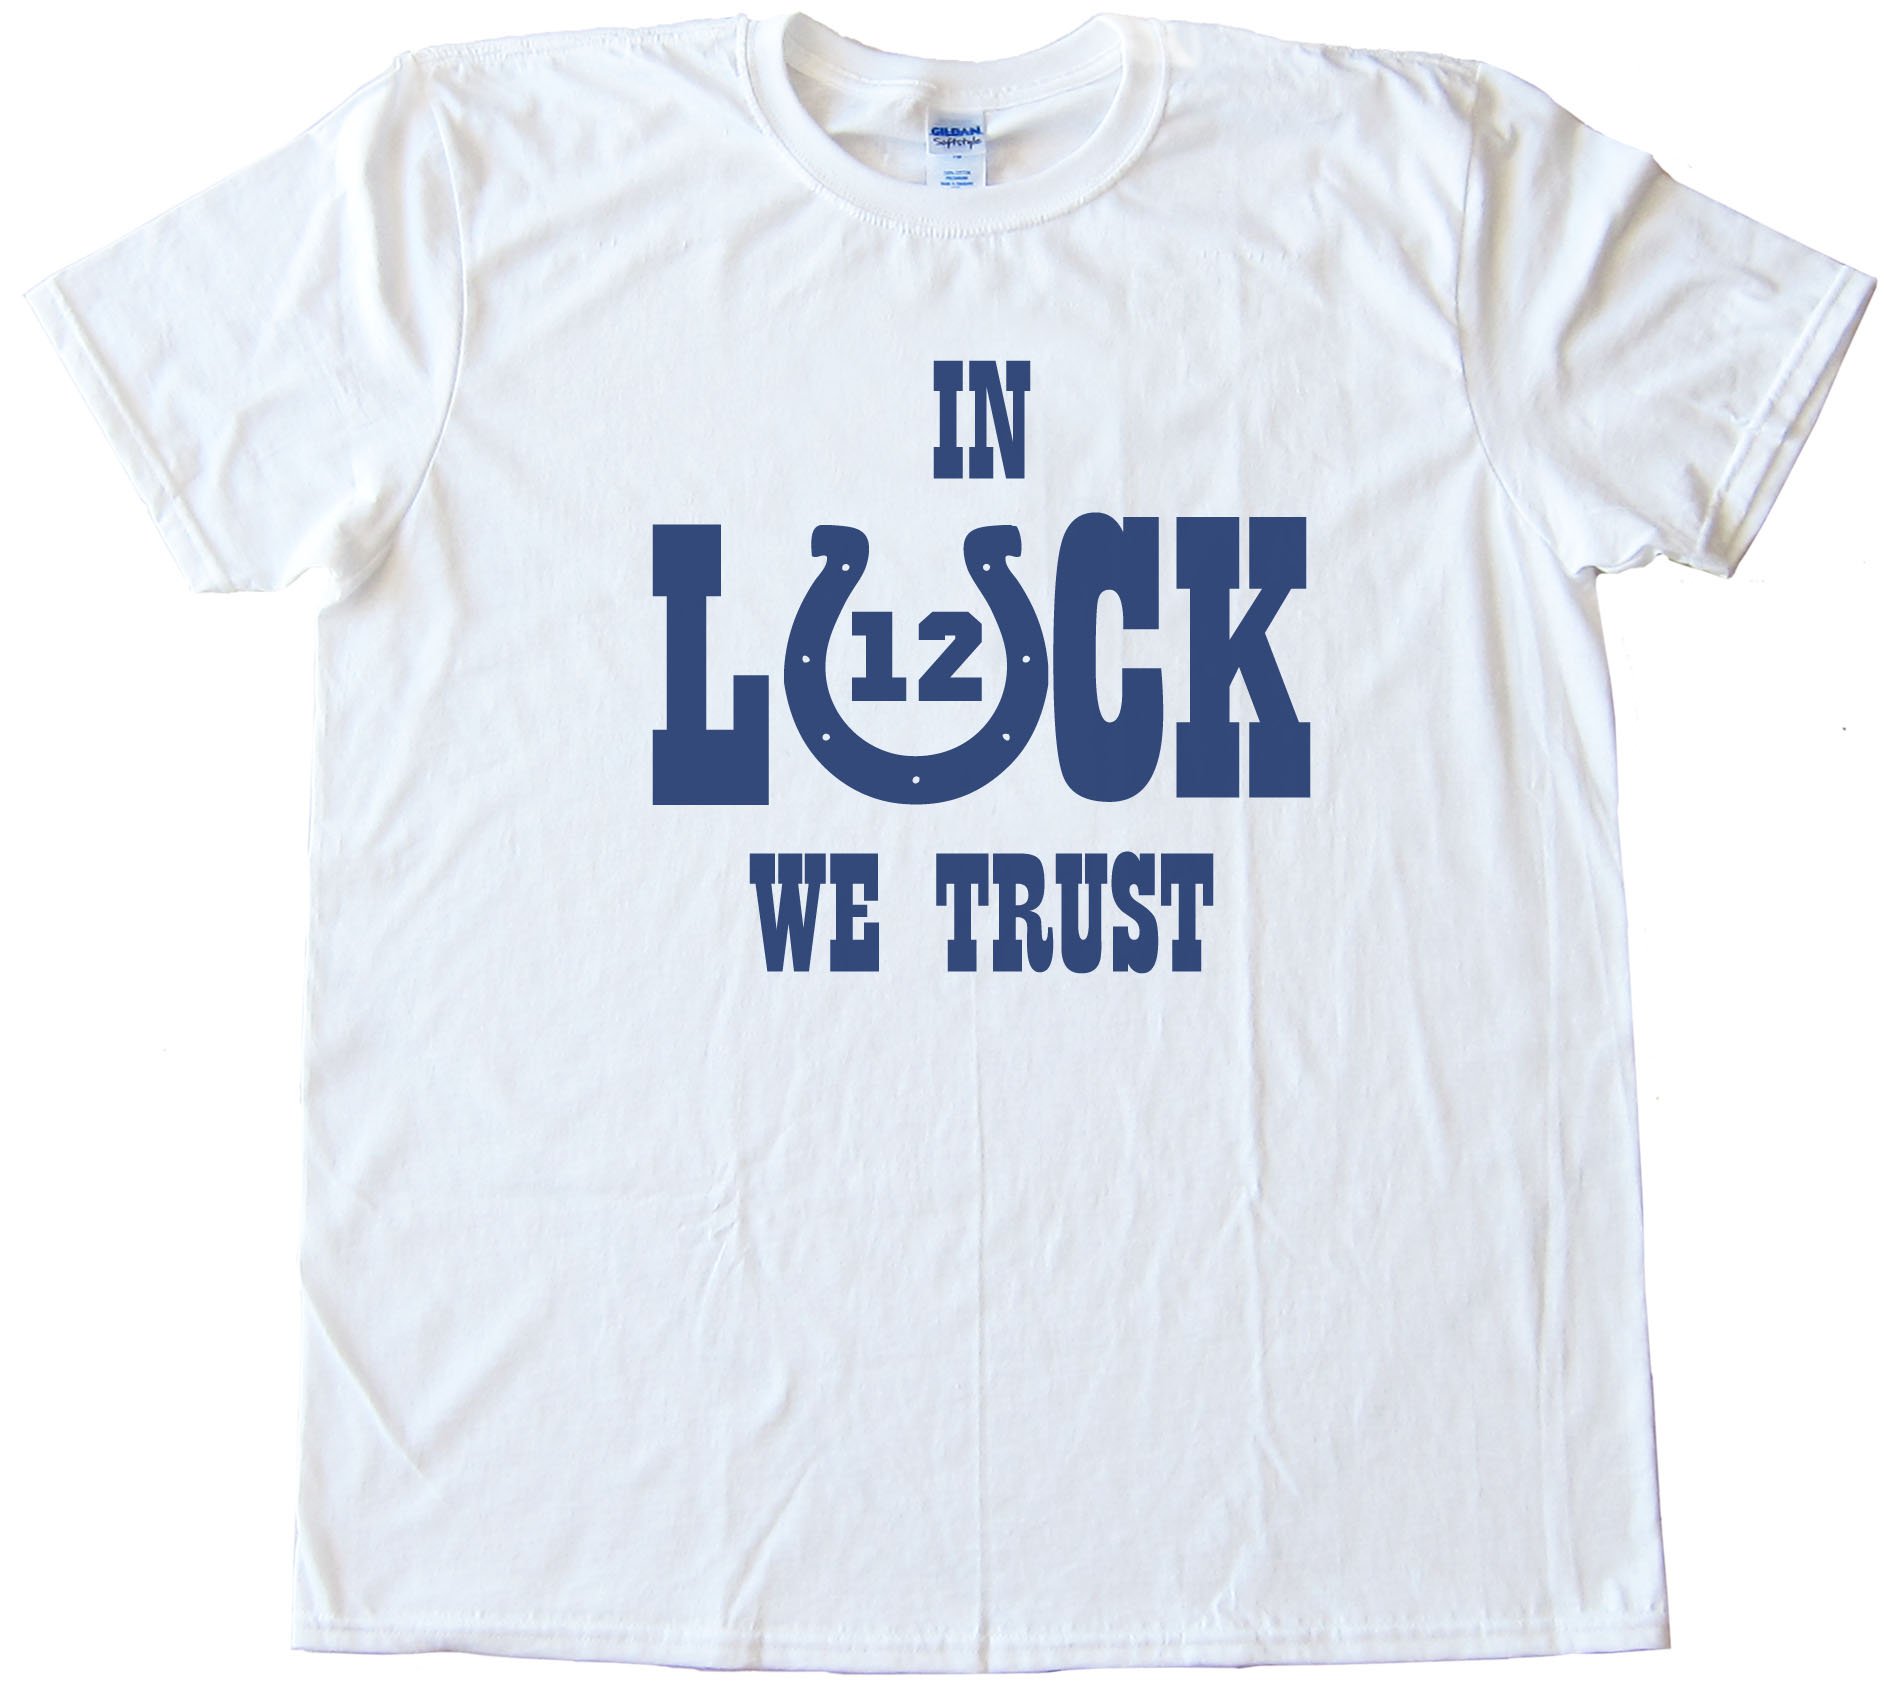 In Luck We Trust - Andrew Luck Indianapolis Colts Tee Shirt